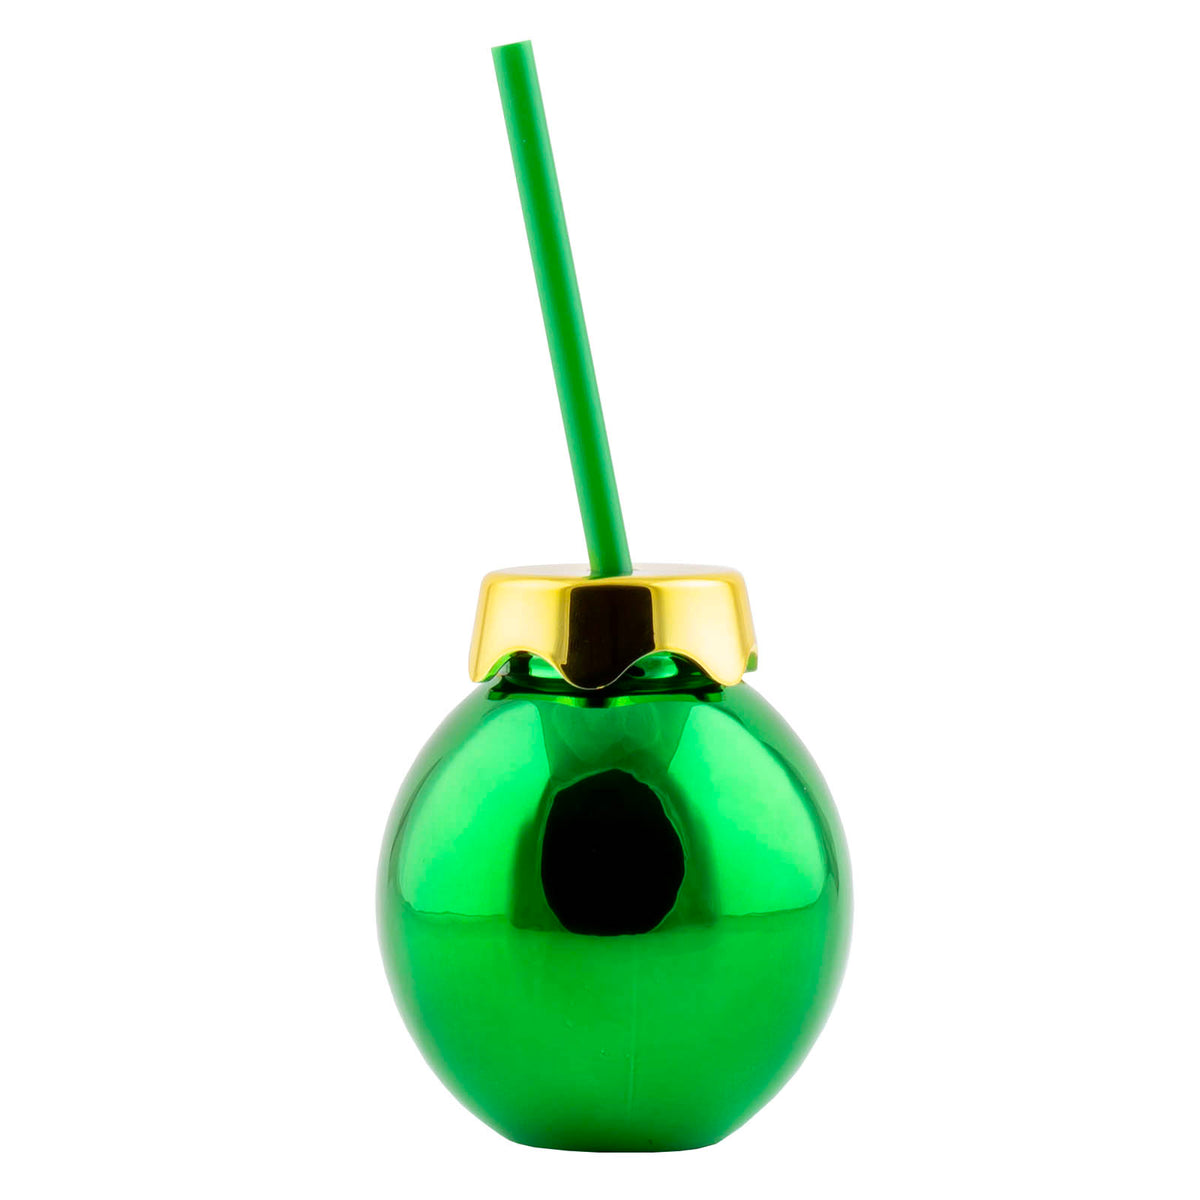 https://www.barproductsus.shop/wp-content/uploads/1692/26/barconic-christmas-ball-cup-color-options-12-ounce-barproducts-com-explore-our-collection-today_2.jpg